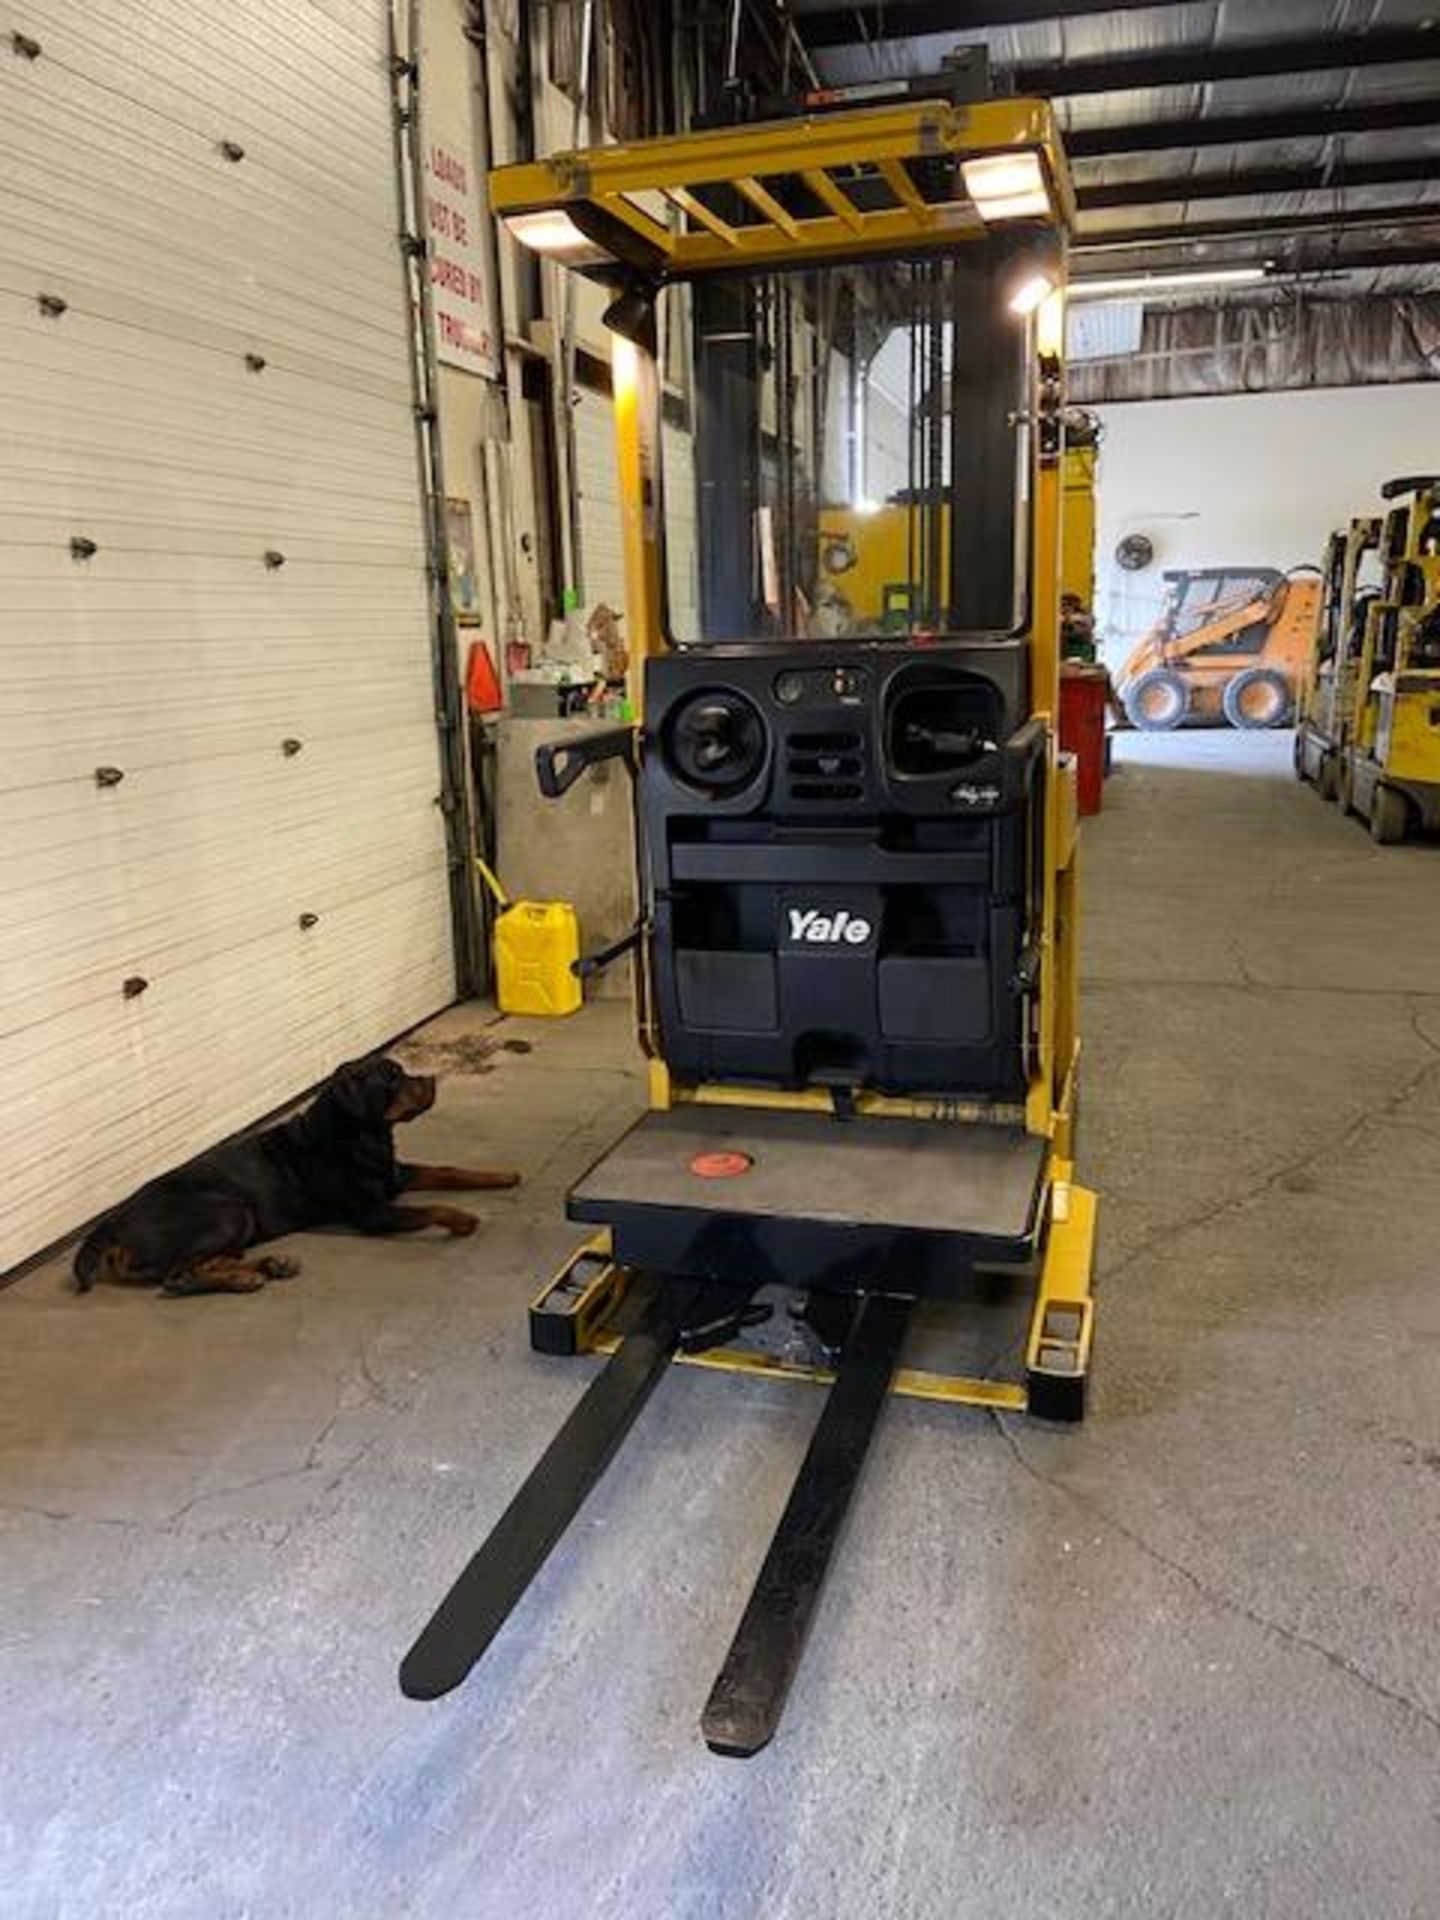 FREE CUSTOMS - Yale Order Picker Electric Powered Pallet Cart Lifter with low hours - Image 2 of 3